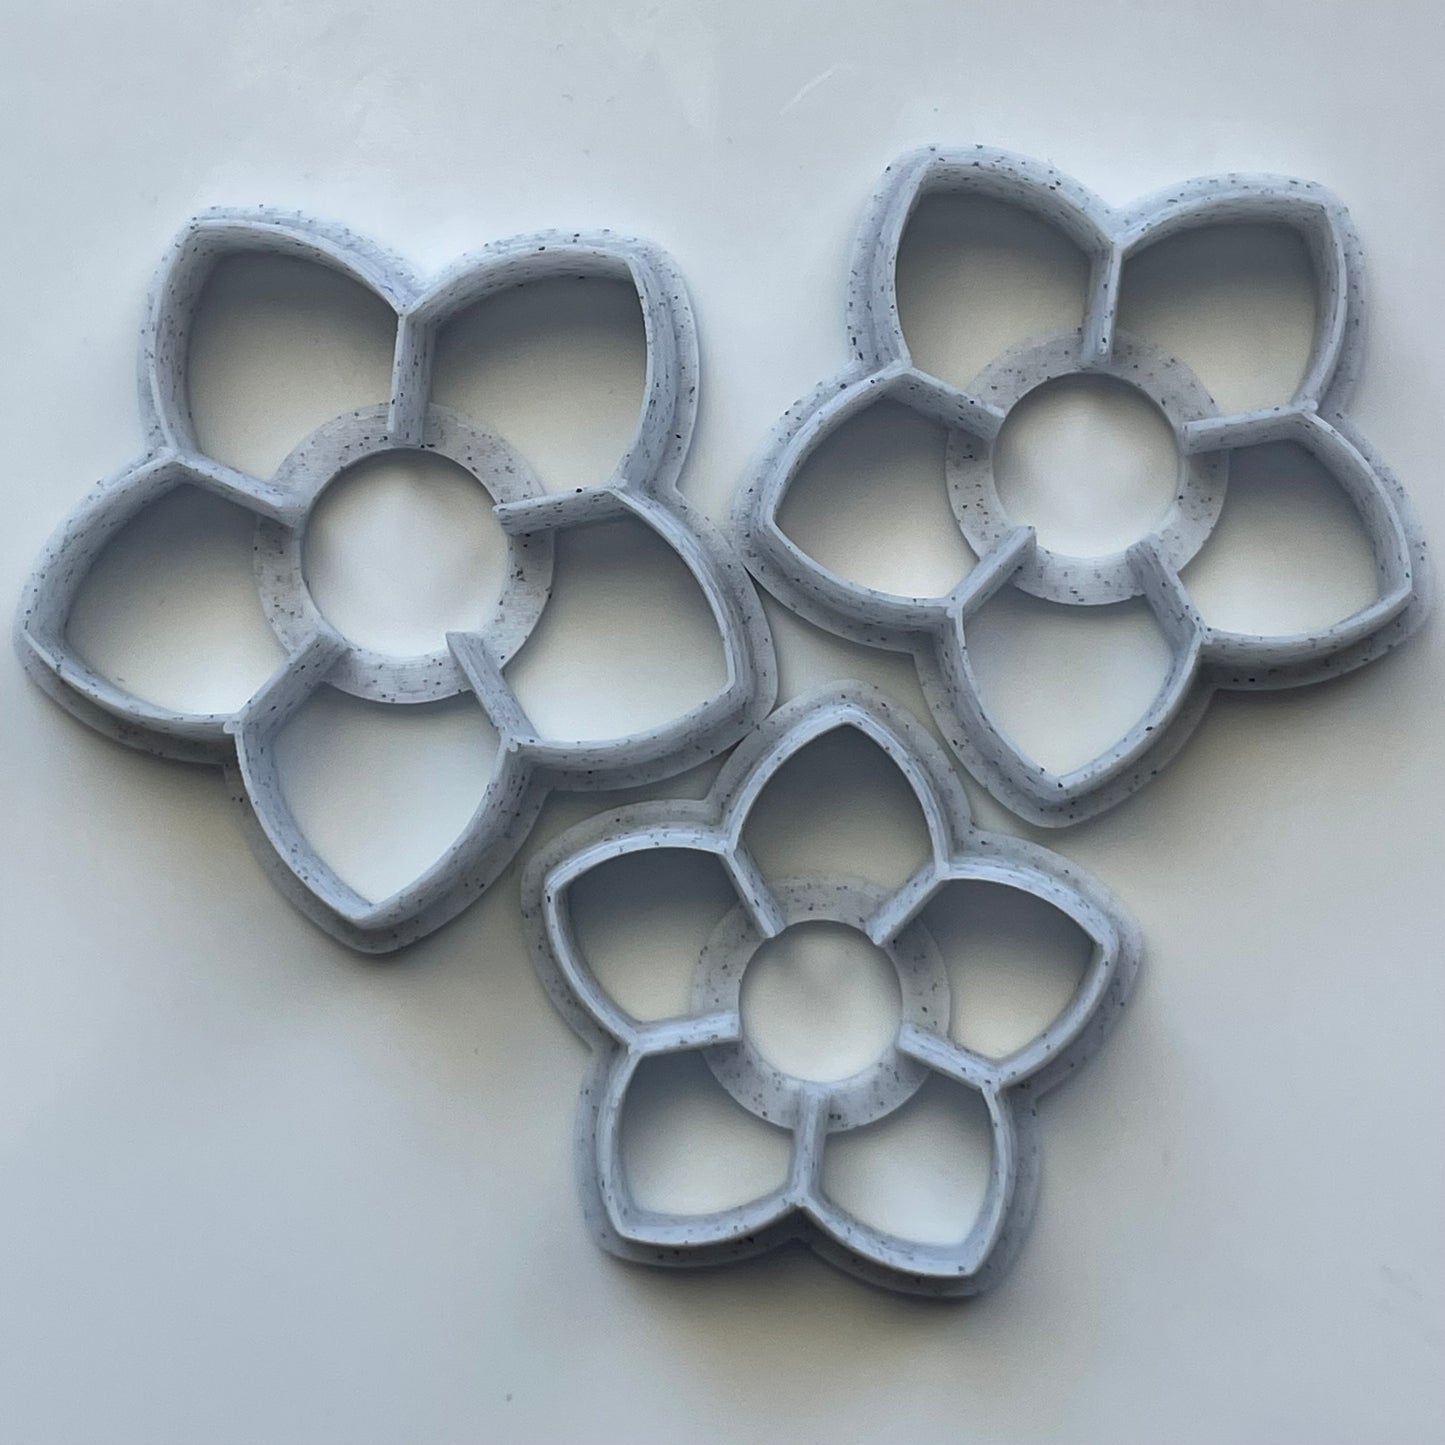 Layered flowers cutter set - made for use with polymer clay